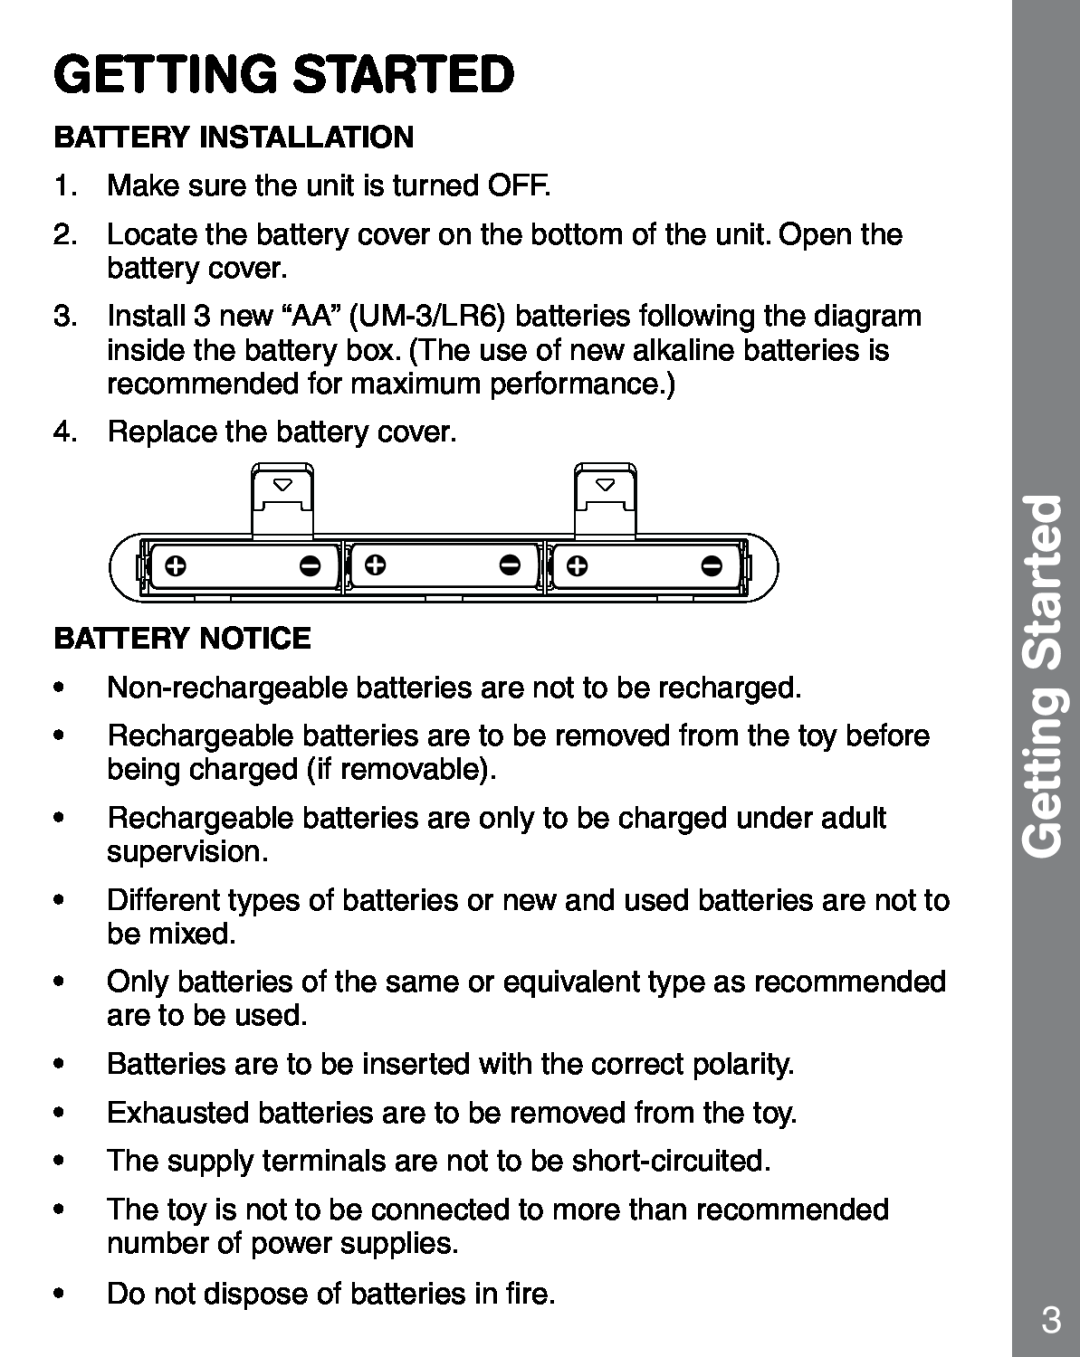 VTech 91-02241-000 manual Getting Started, Battery Installation, Battery Notice 